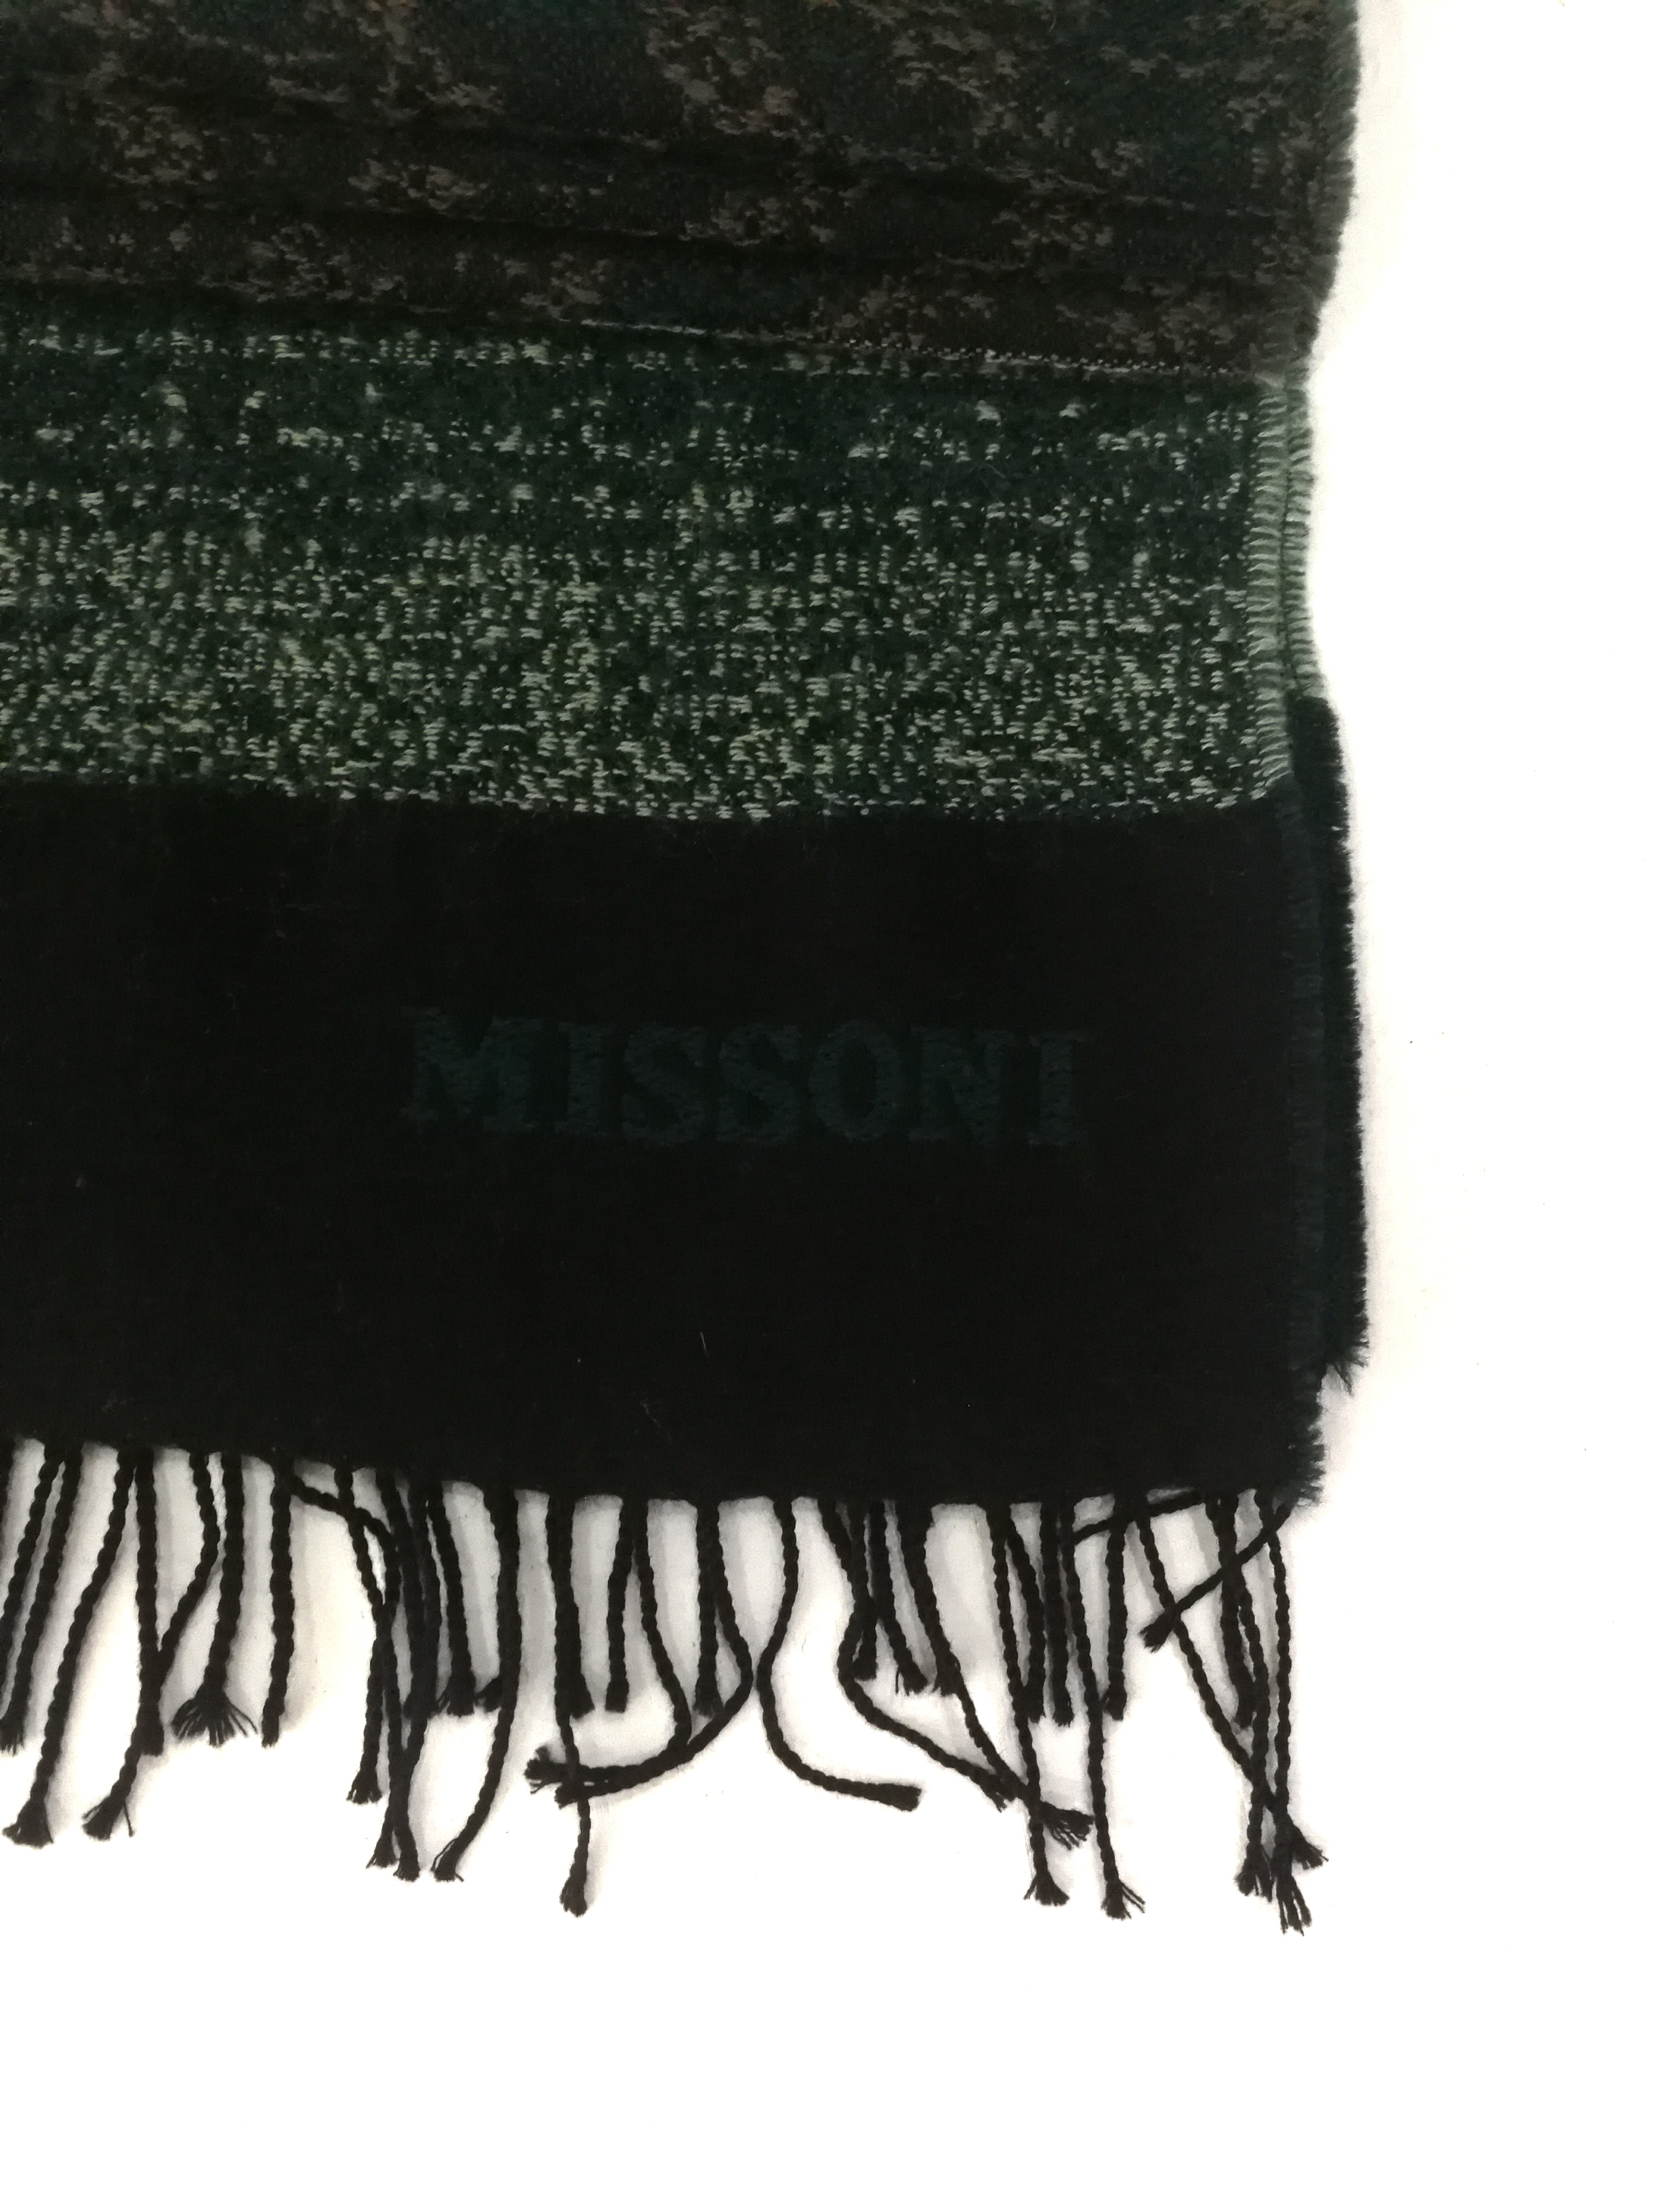 Hot Sale!! Missoni wool scarf very good conditions (SB015) - 3